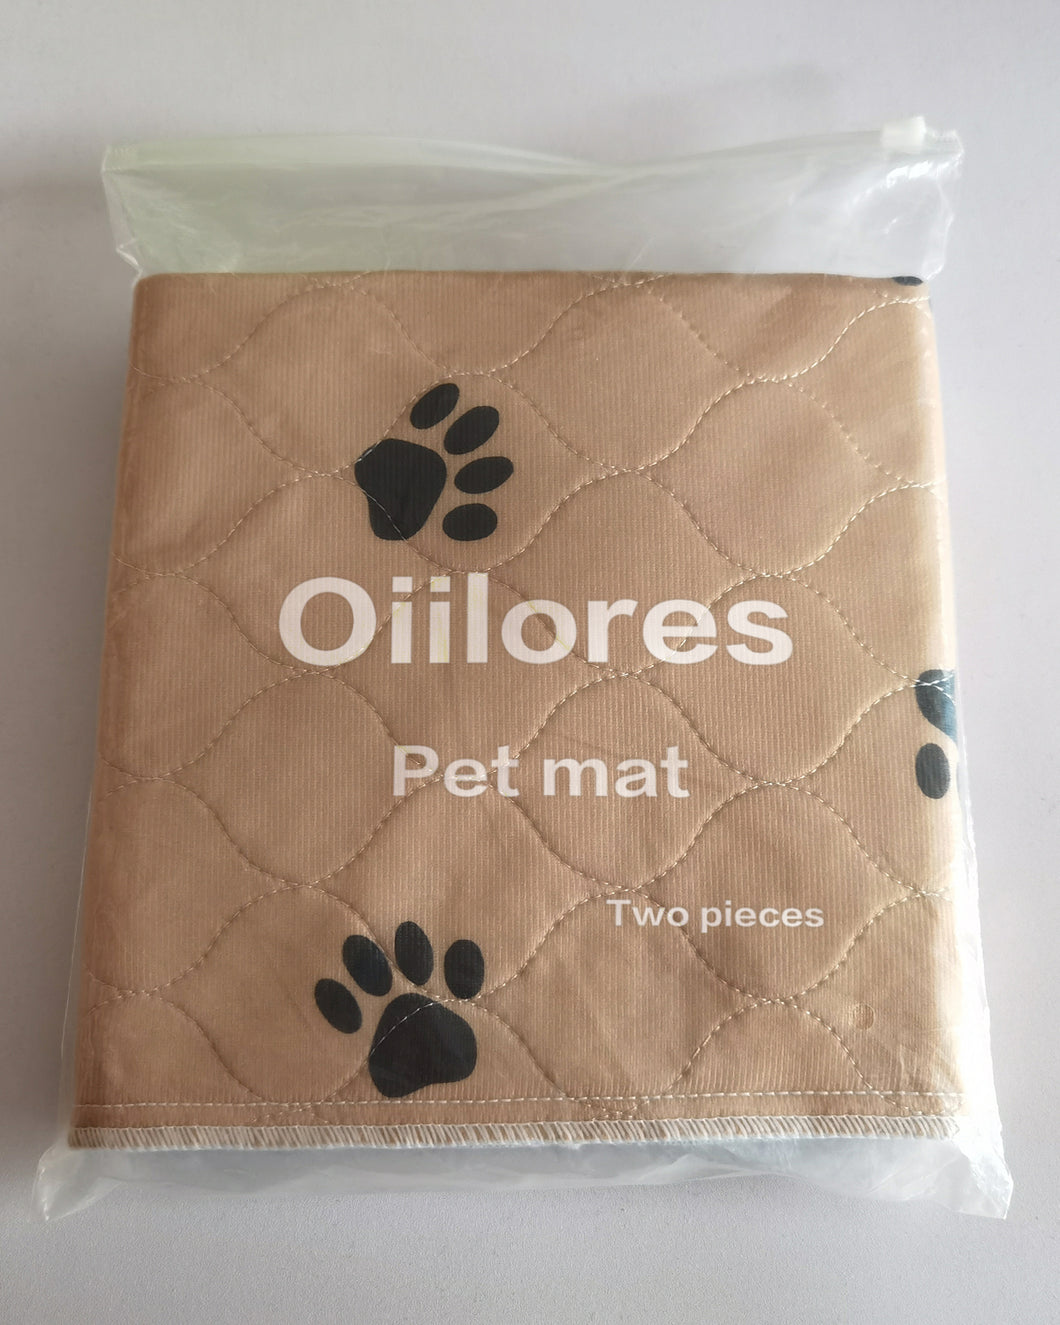 Oiilores Large Pet Cushion, Waterproof Training Pads for Dogs & Reusable Dog Pee Pads